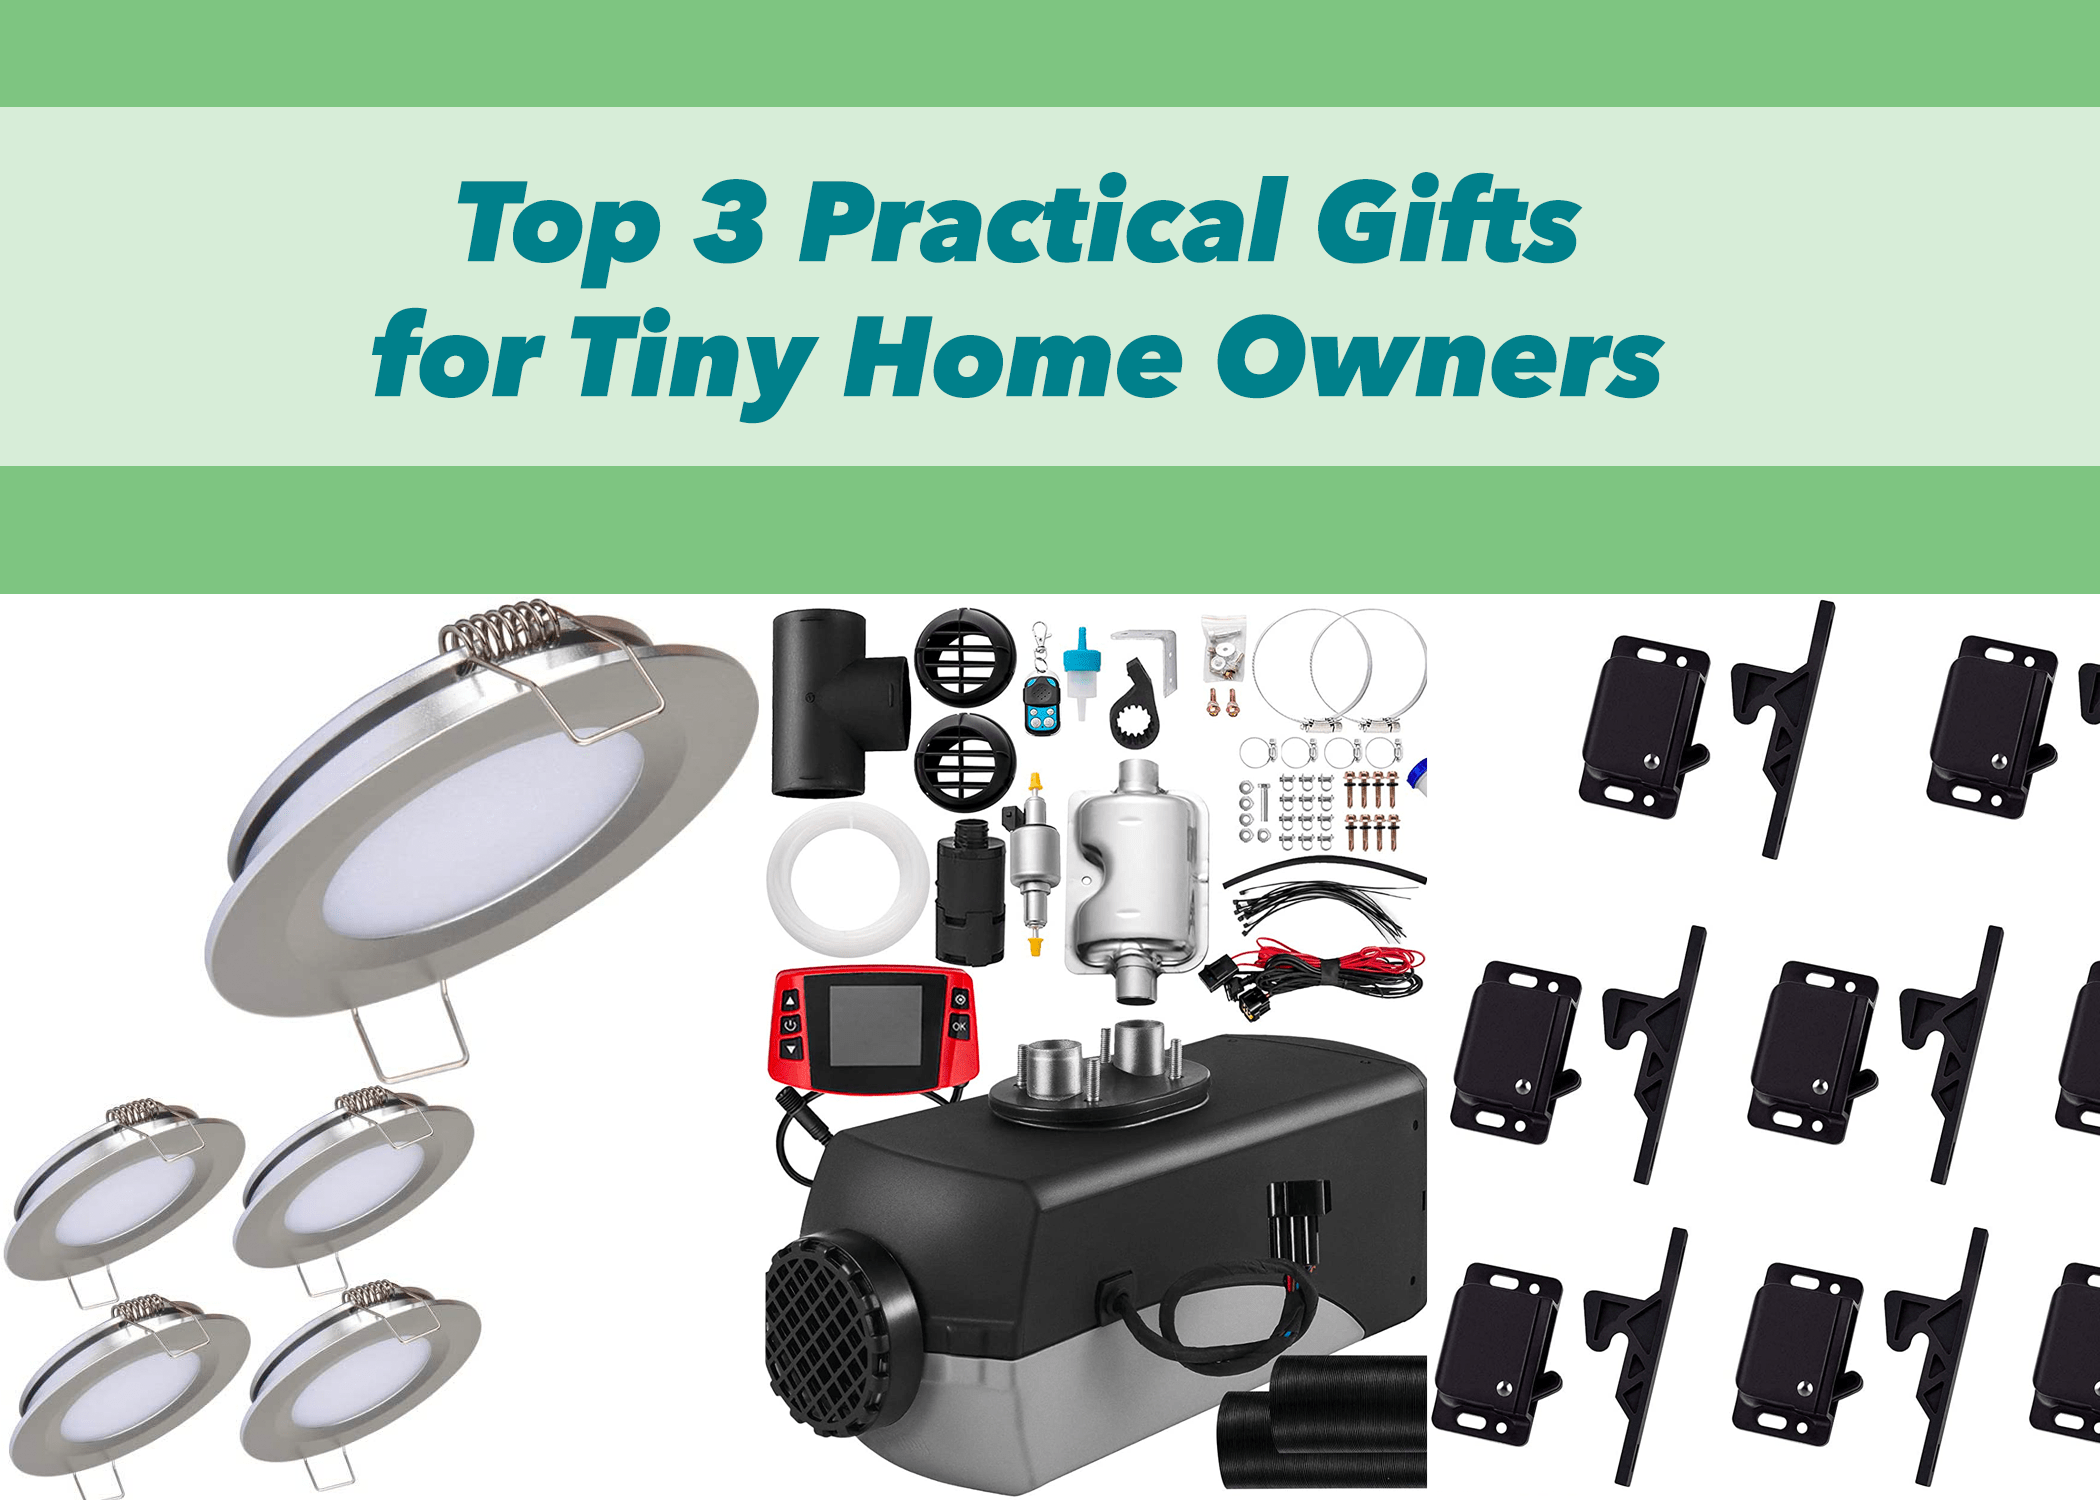 Top 3 Practical Gifts for Tiny Home Owners